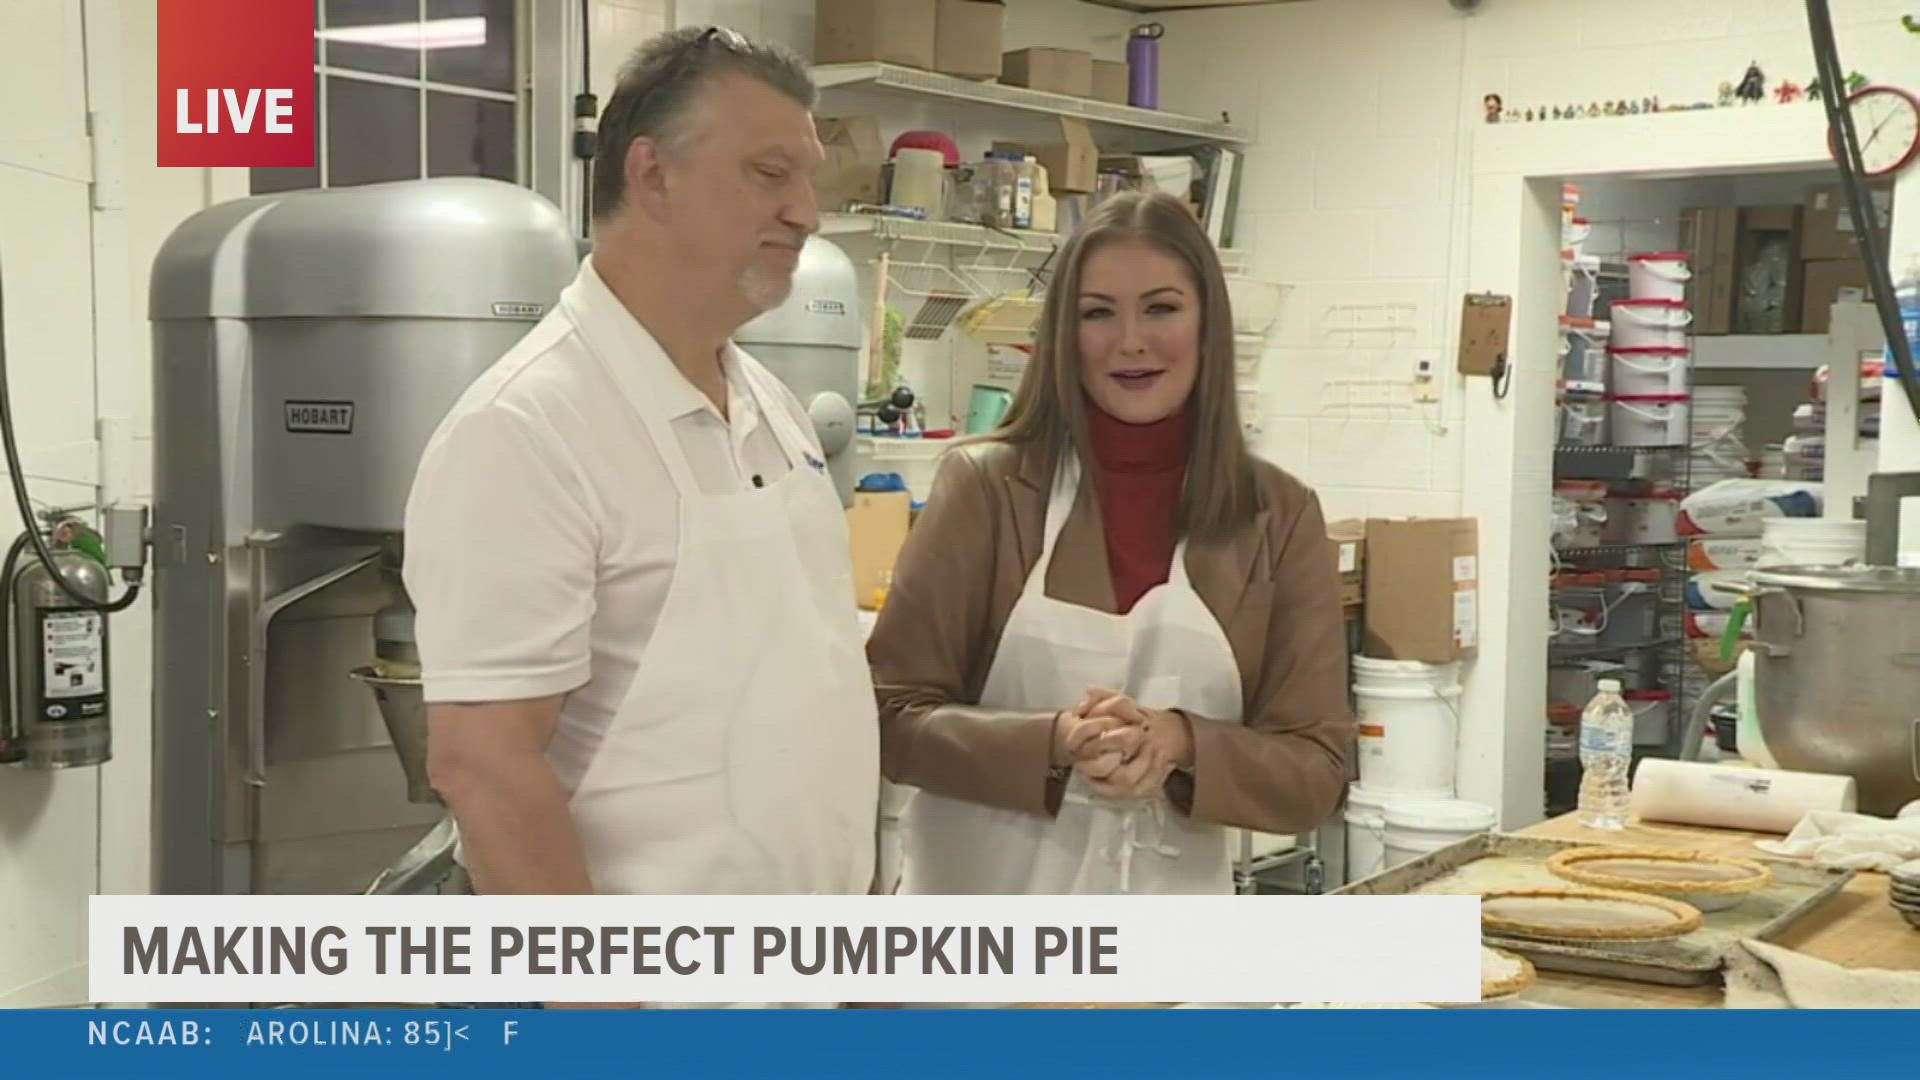 We reached out to an expert to share their tips on how to make the perfect pumpkin pie ahead of Thanksgiving.